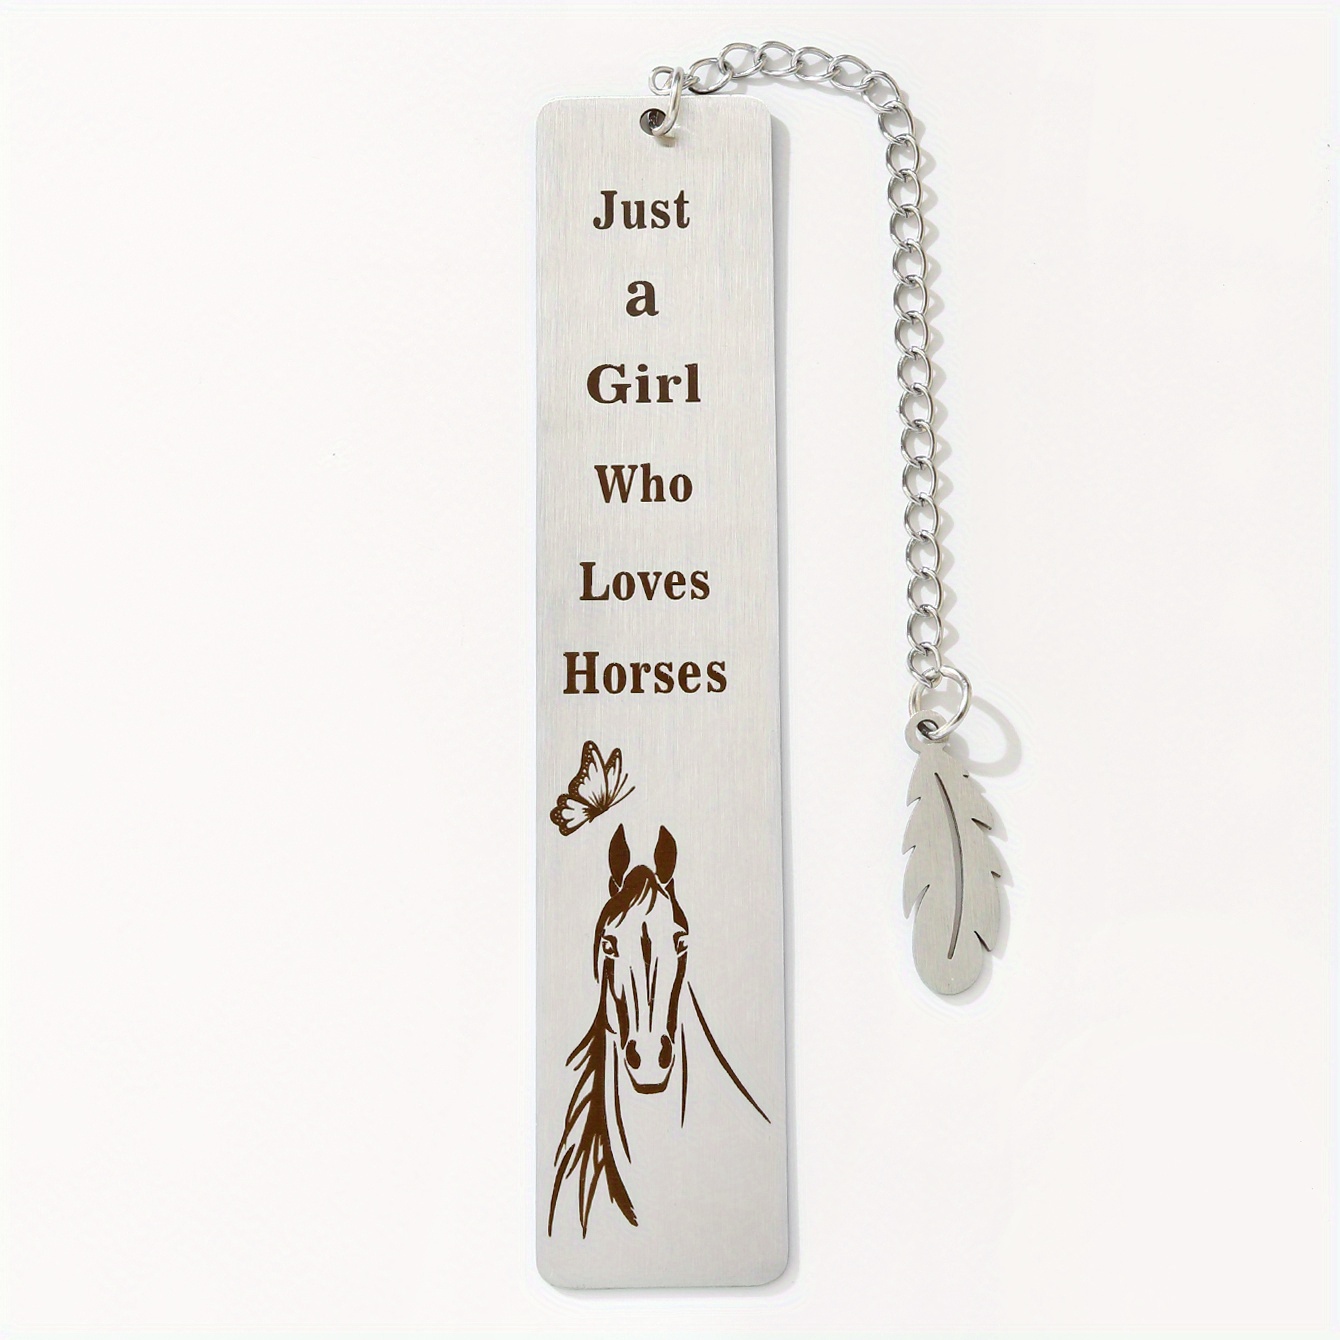 Unique Stainless Steel Bookmark - Perfect Gift for Horse-Loving Girls and Students!